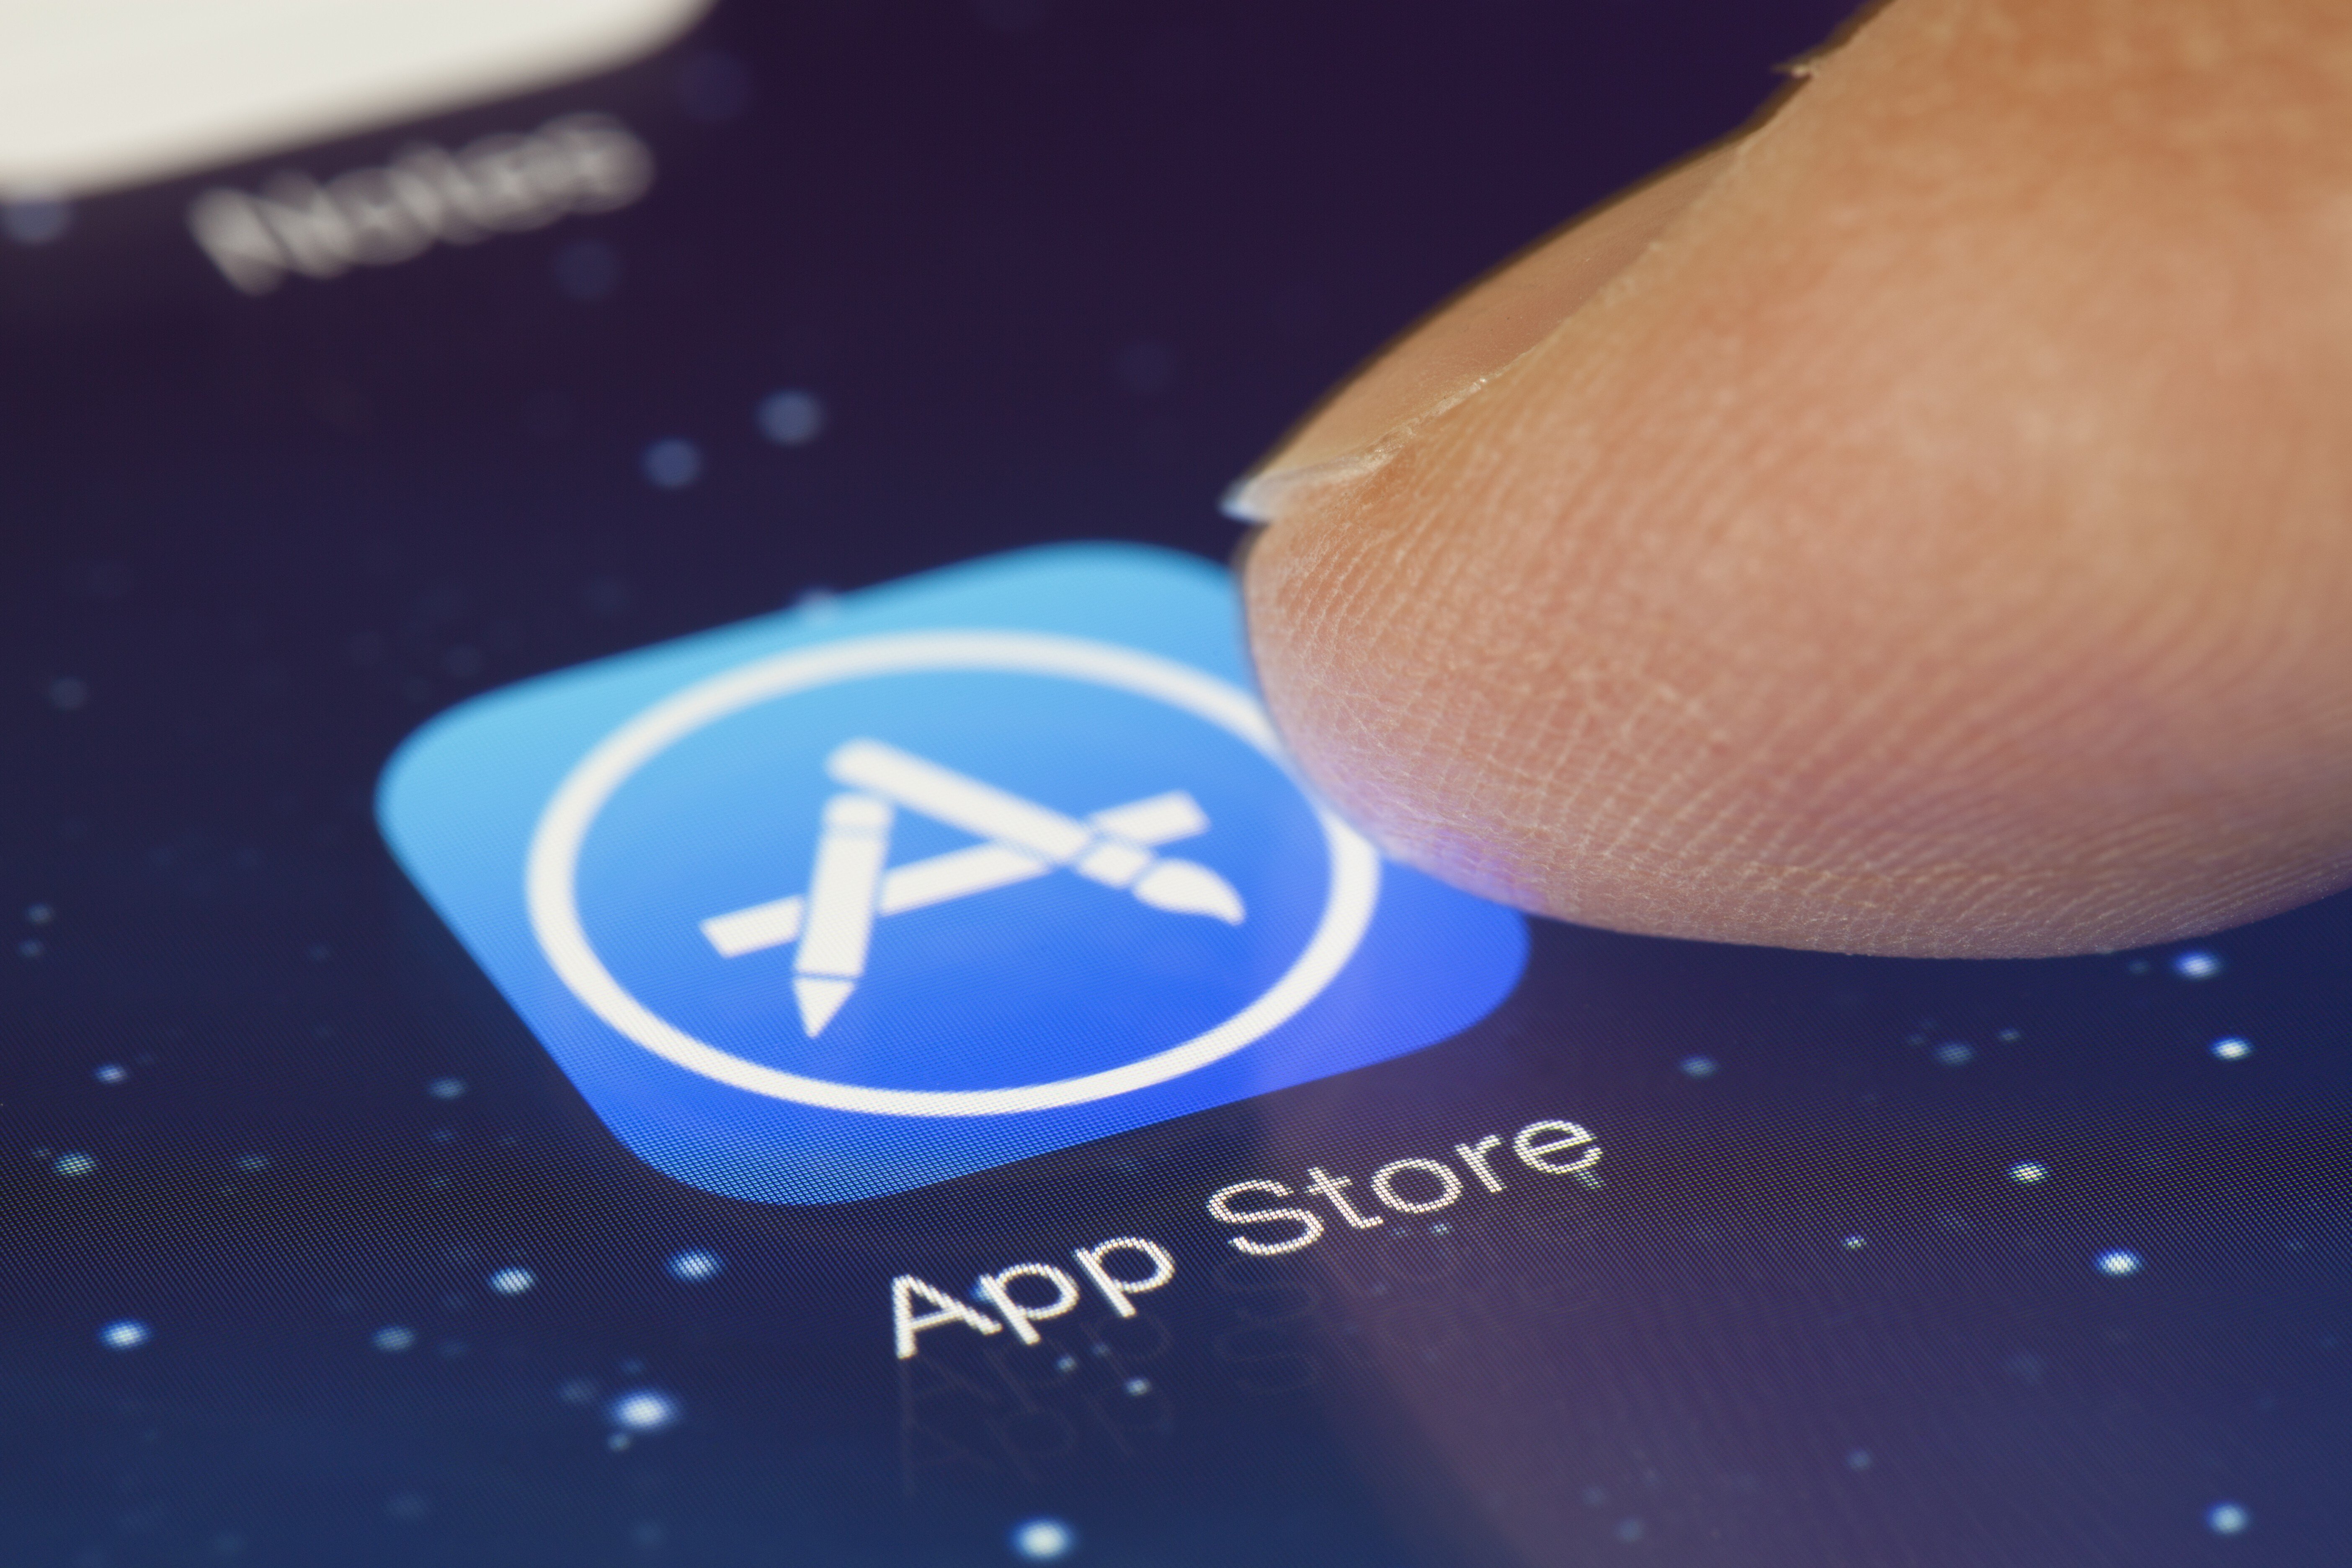 A court in the northern Chinese city Tianjin has found Apple remiss in conducting due diligence on several copyright-infringing apps on its online App Store in mainland China. Photo: Shutterstock